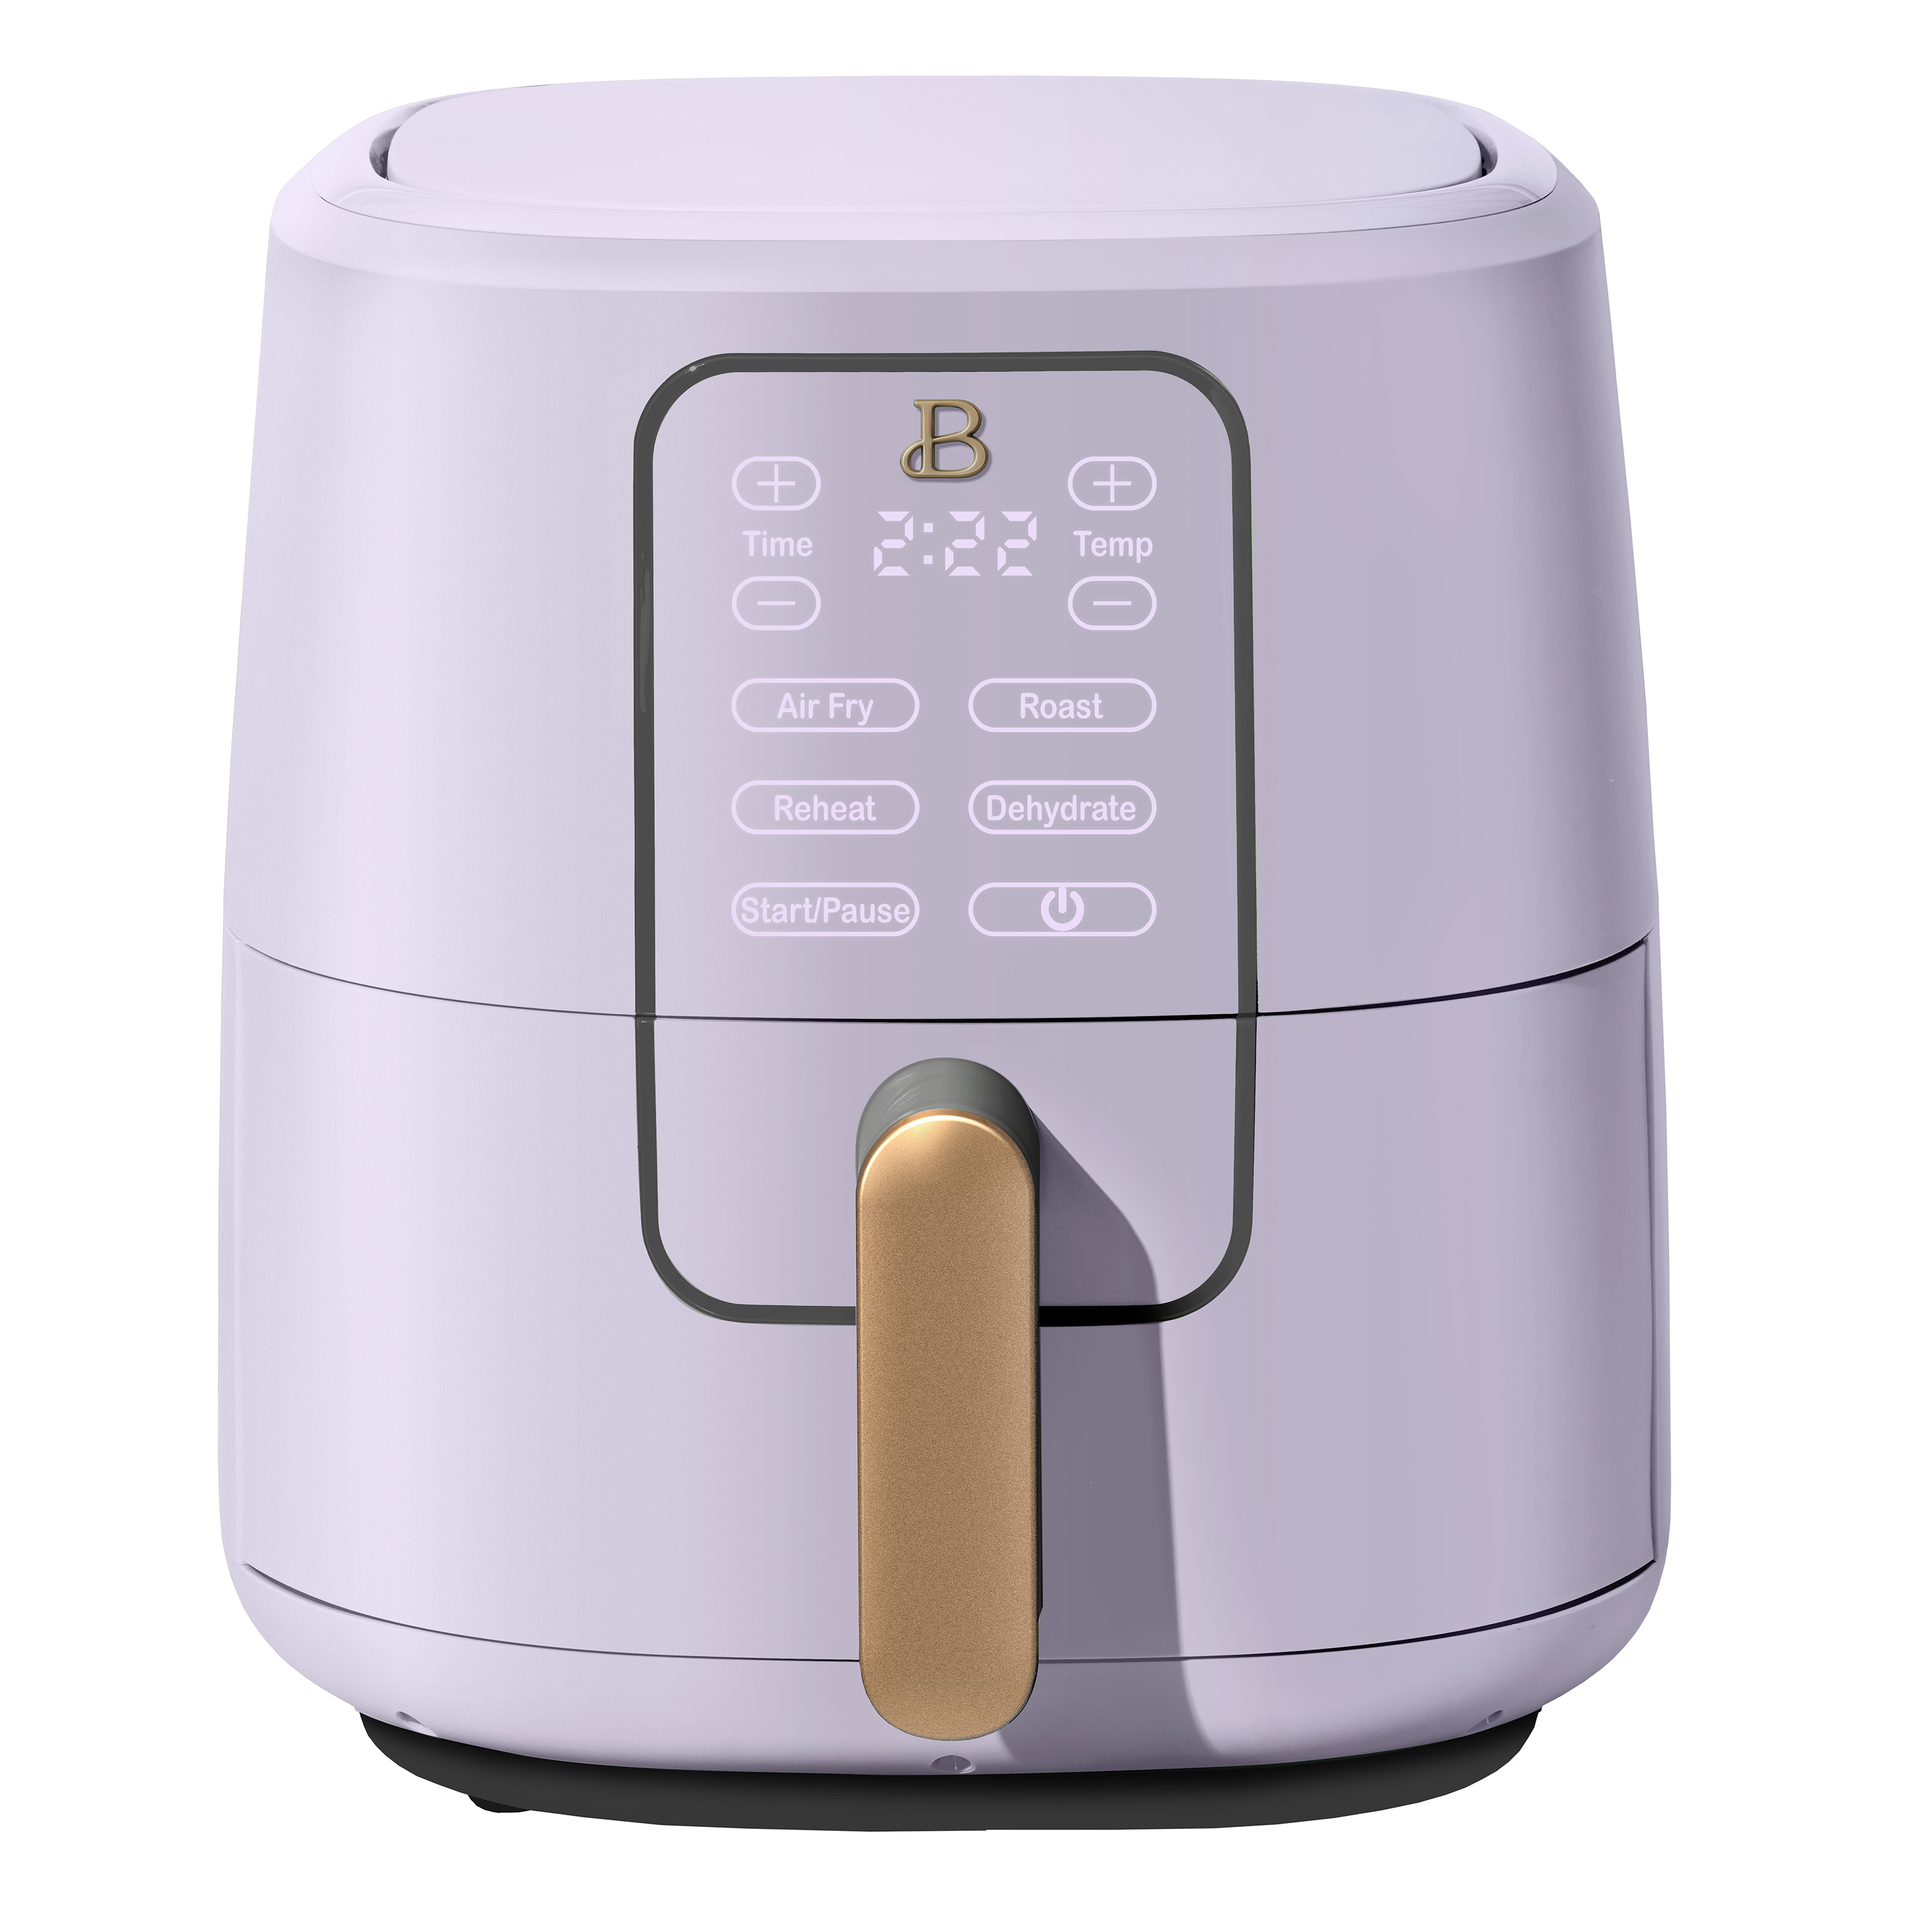 Beautiful 6 Qt Air Fryer with TurboCrisp Technology and Touch-Activated Display, Lavender by Drew Barrymore - image 1 of 10